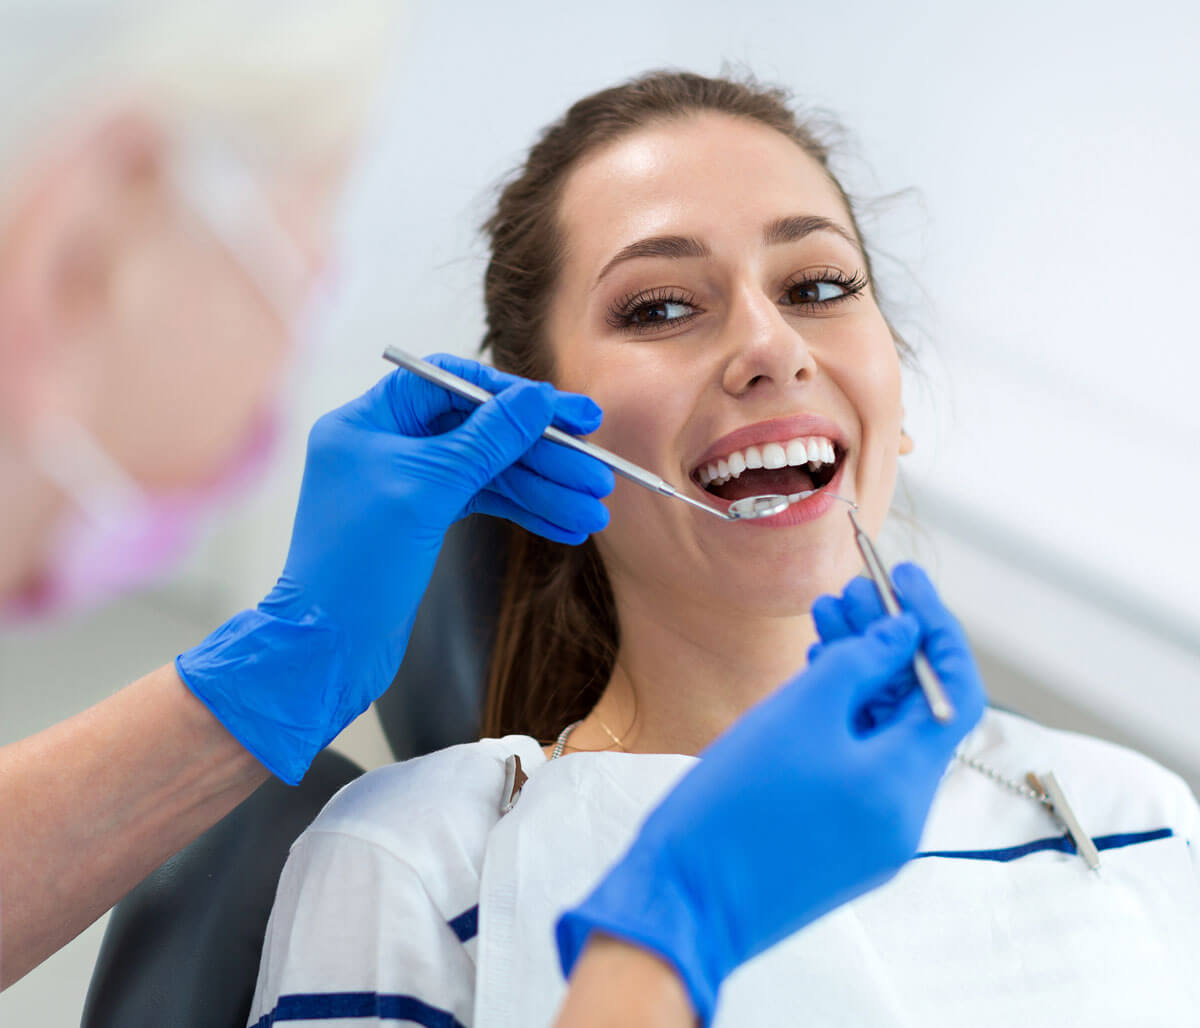 True teeth cleaning extends beyond the commonly known methods in Bloomington, IL